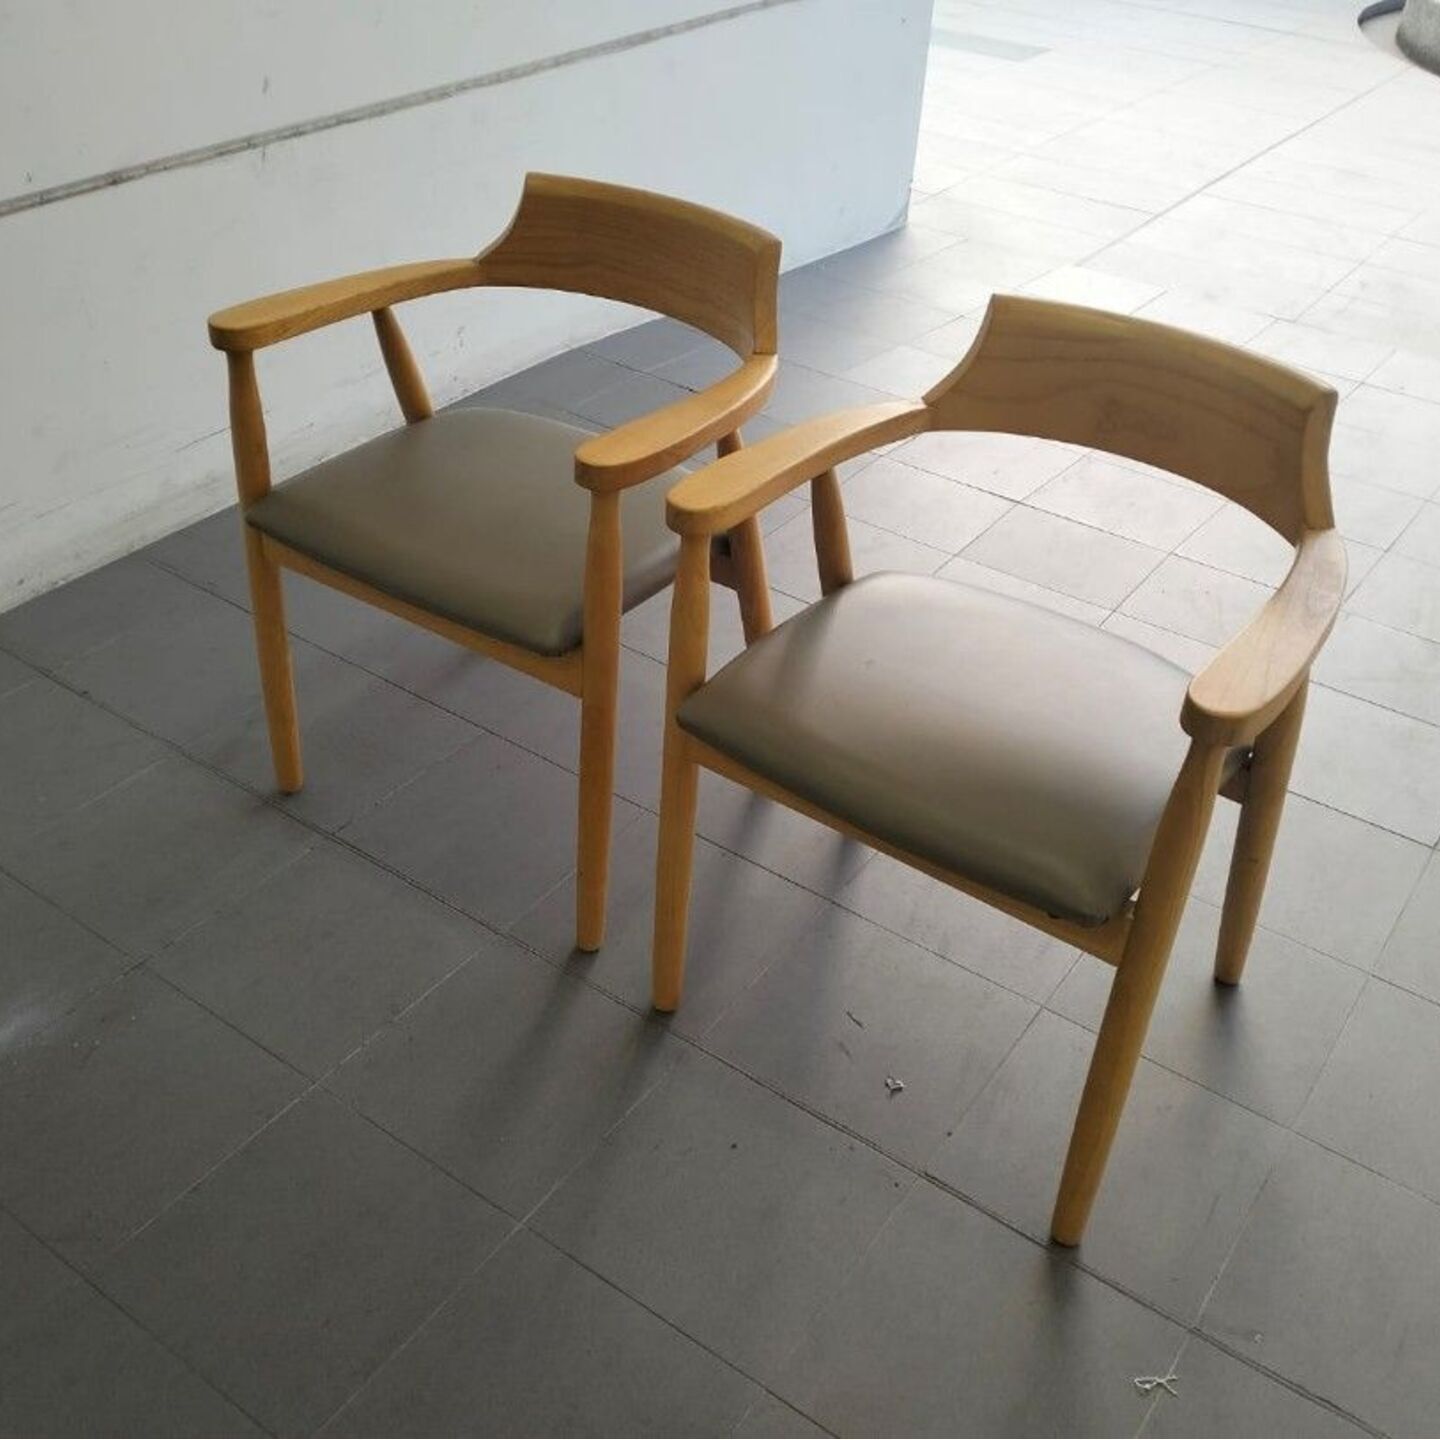 BALDER Wooden Dining Chairs (set of 2)